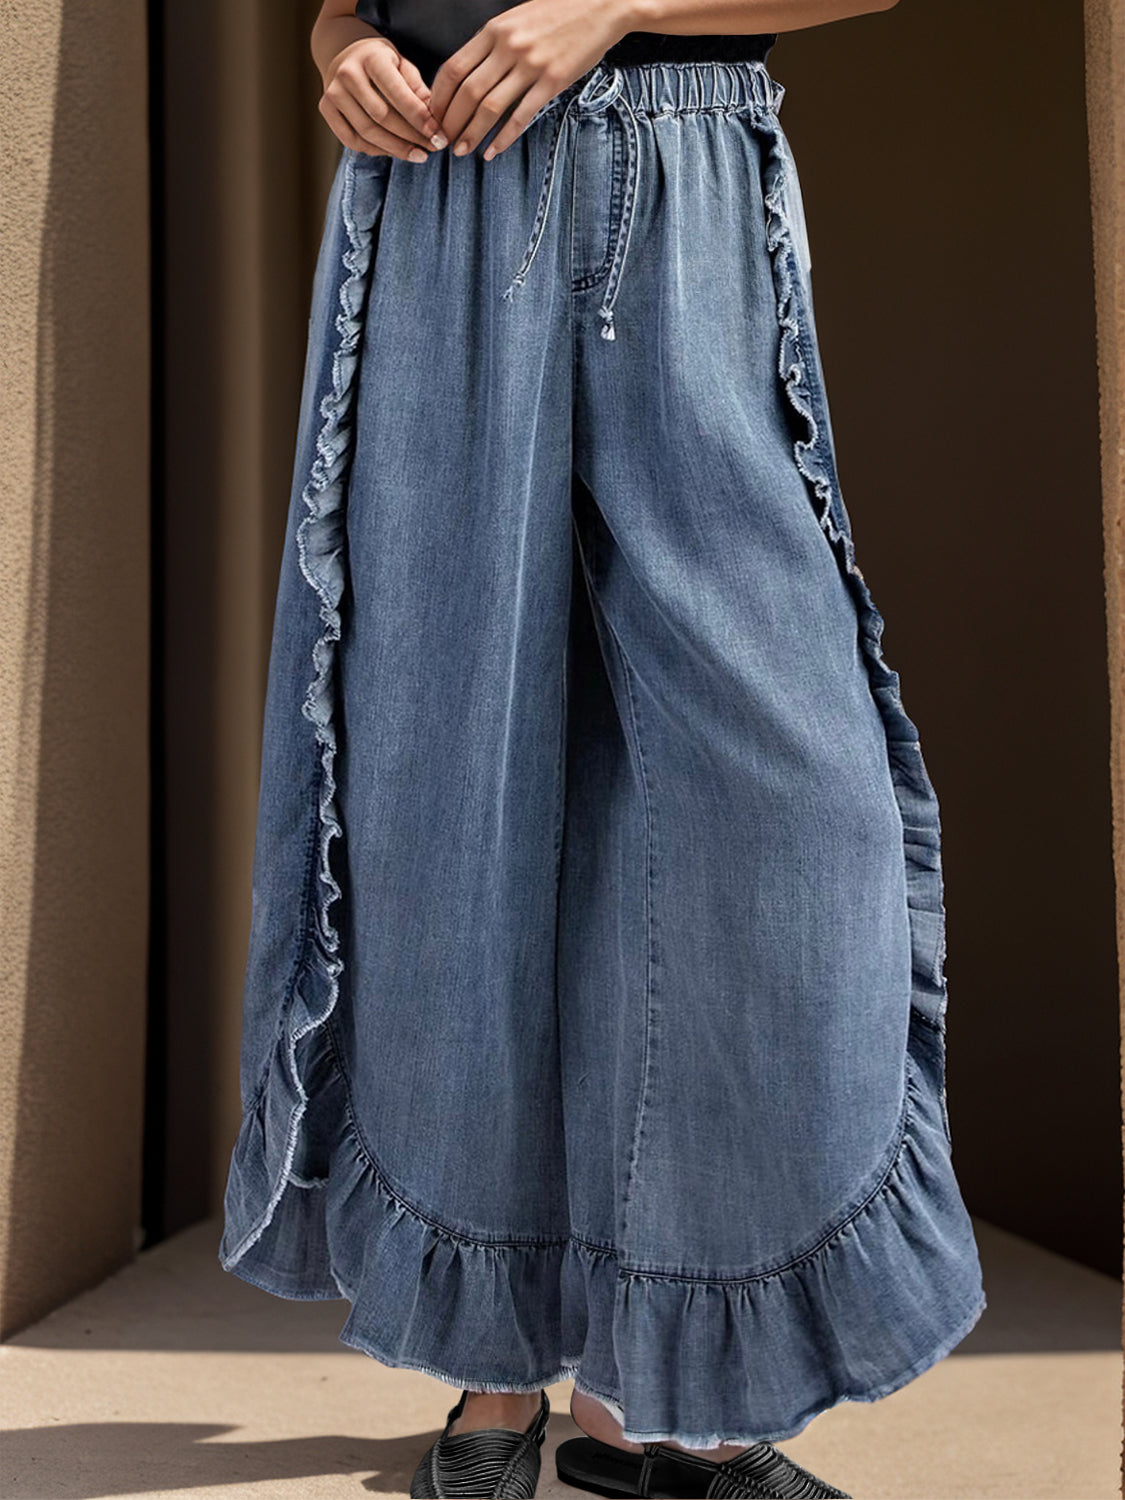 Drawstring Jeans - Wedeh's Fashion